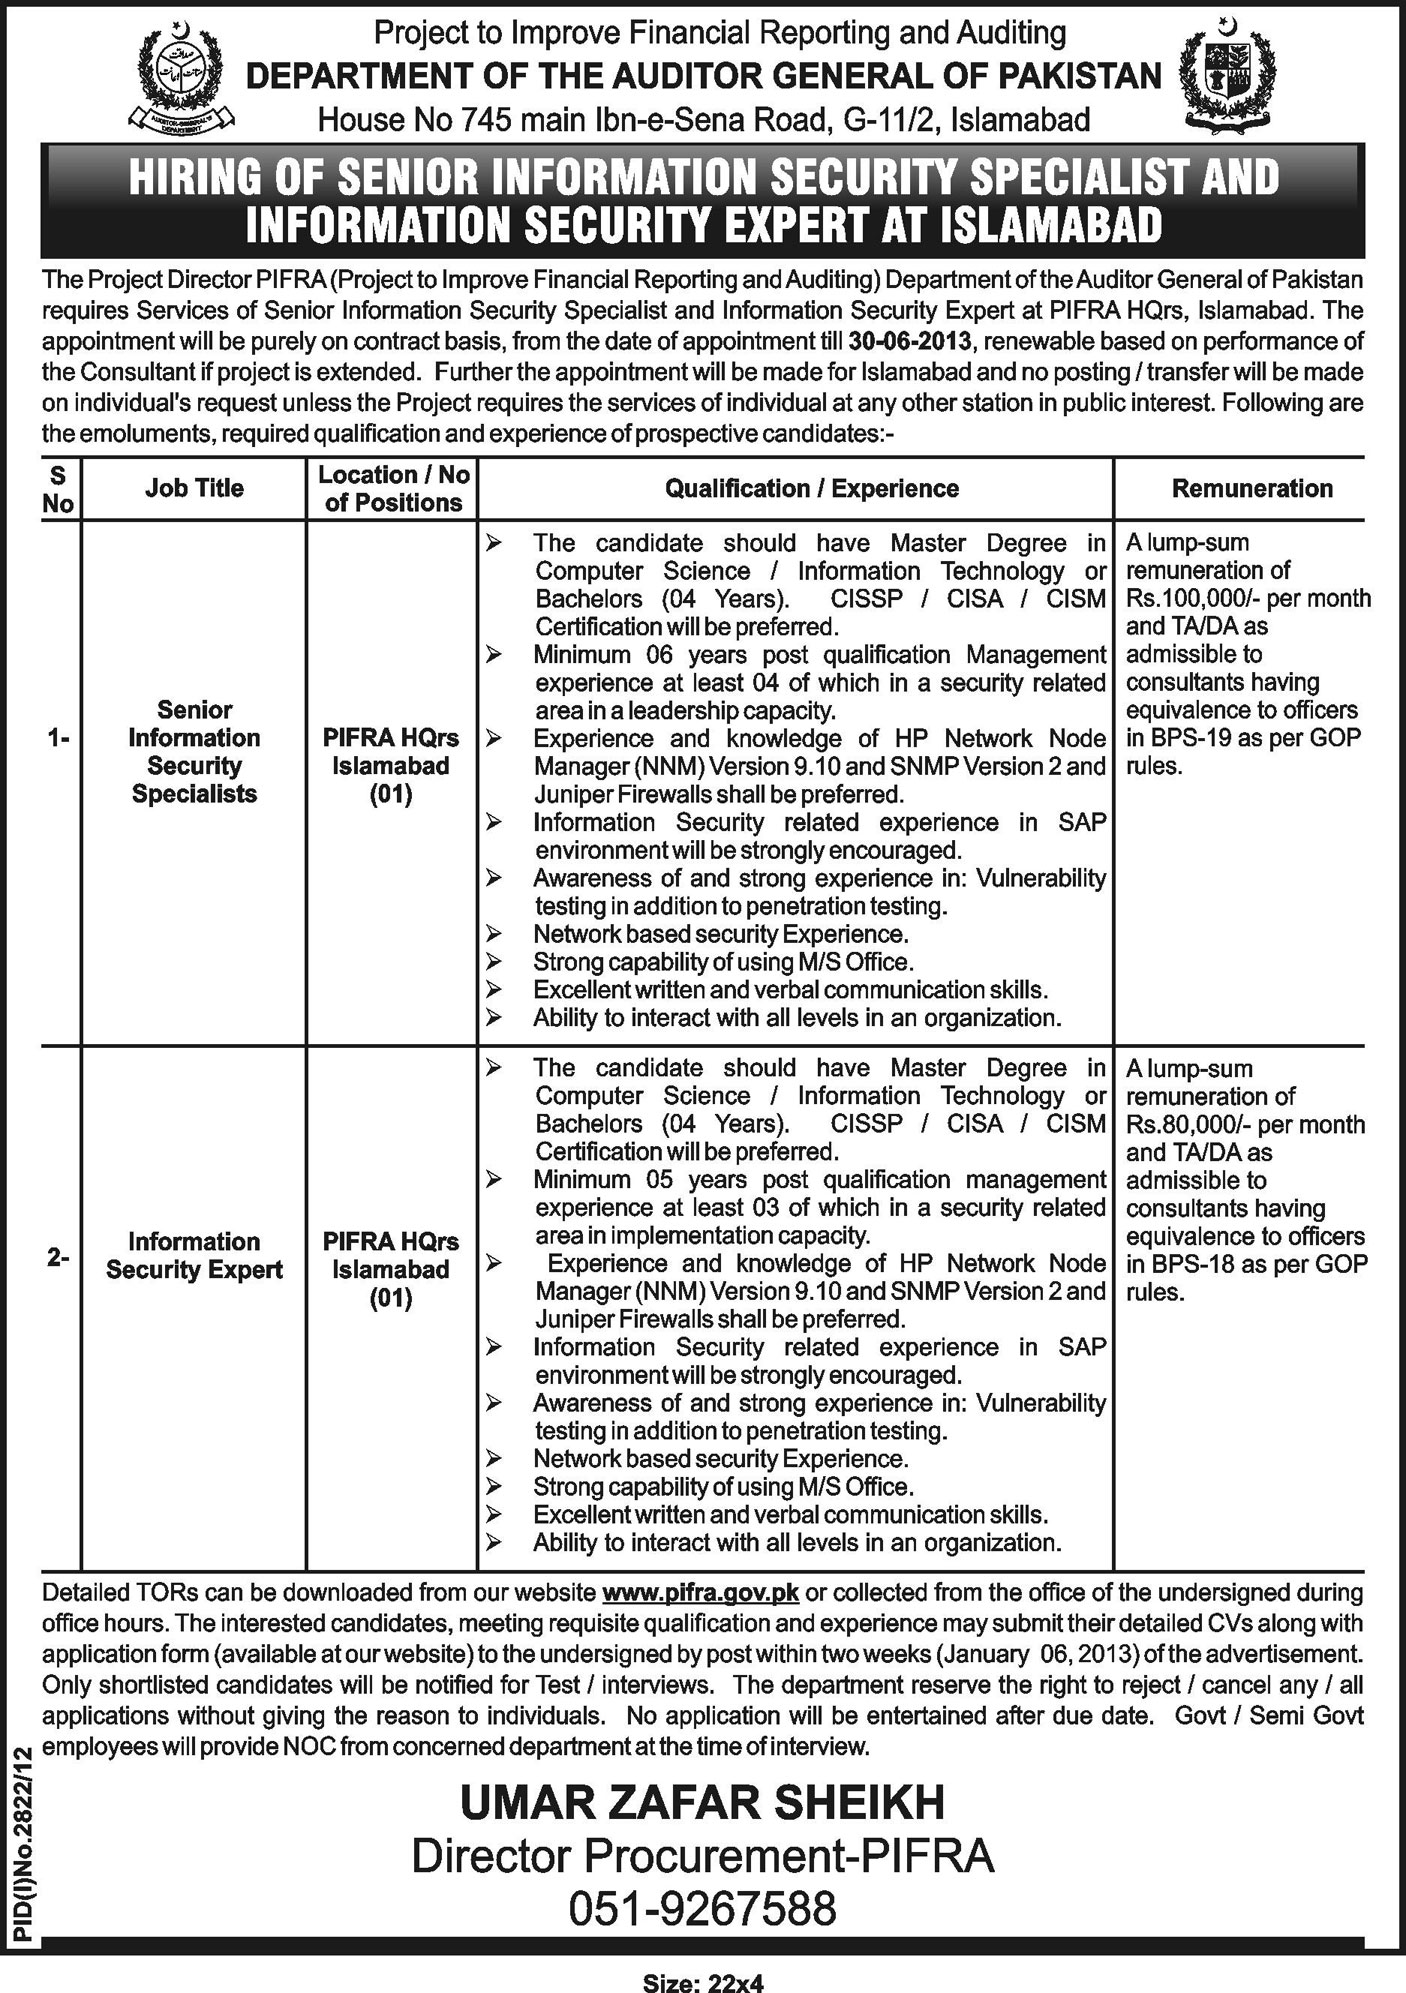 PIFRA Project of Department of Auditor General of Pakistan Needs Information Security Specialist & Expert